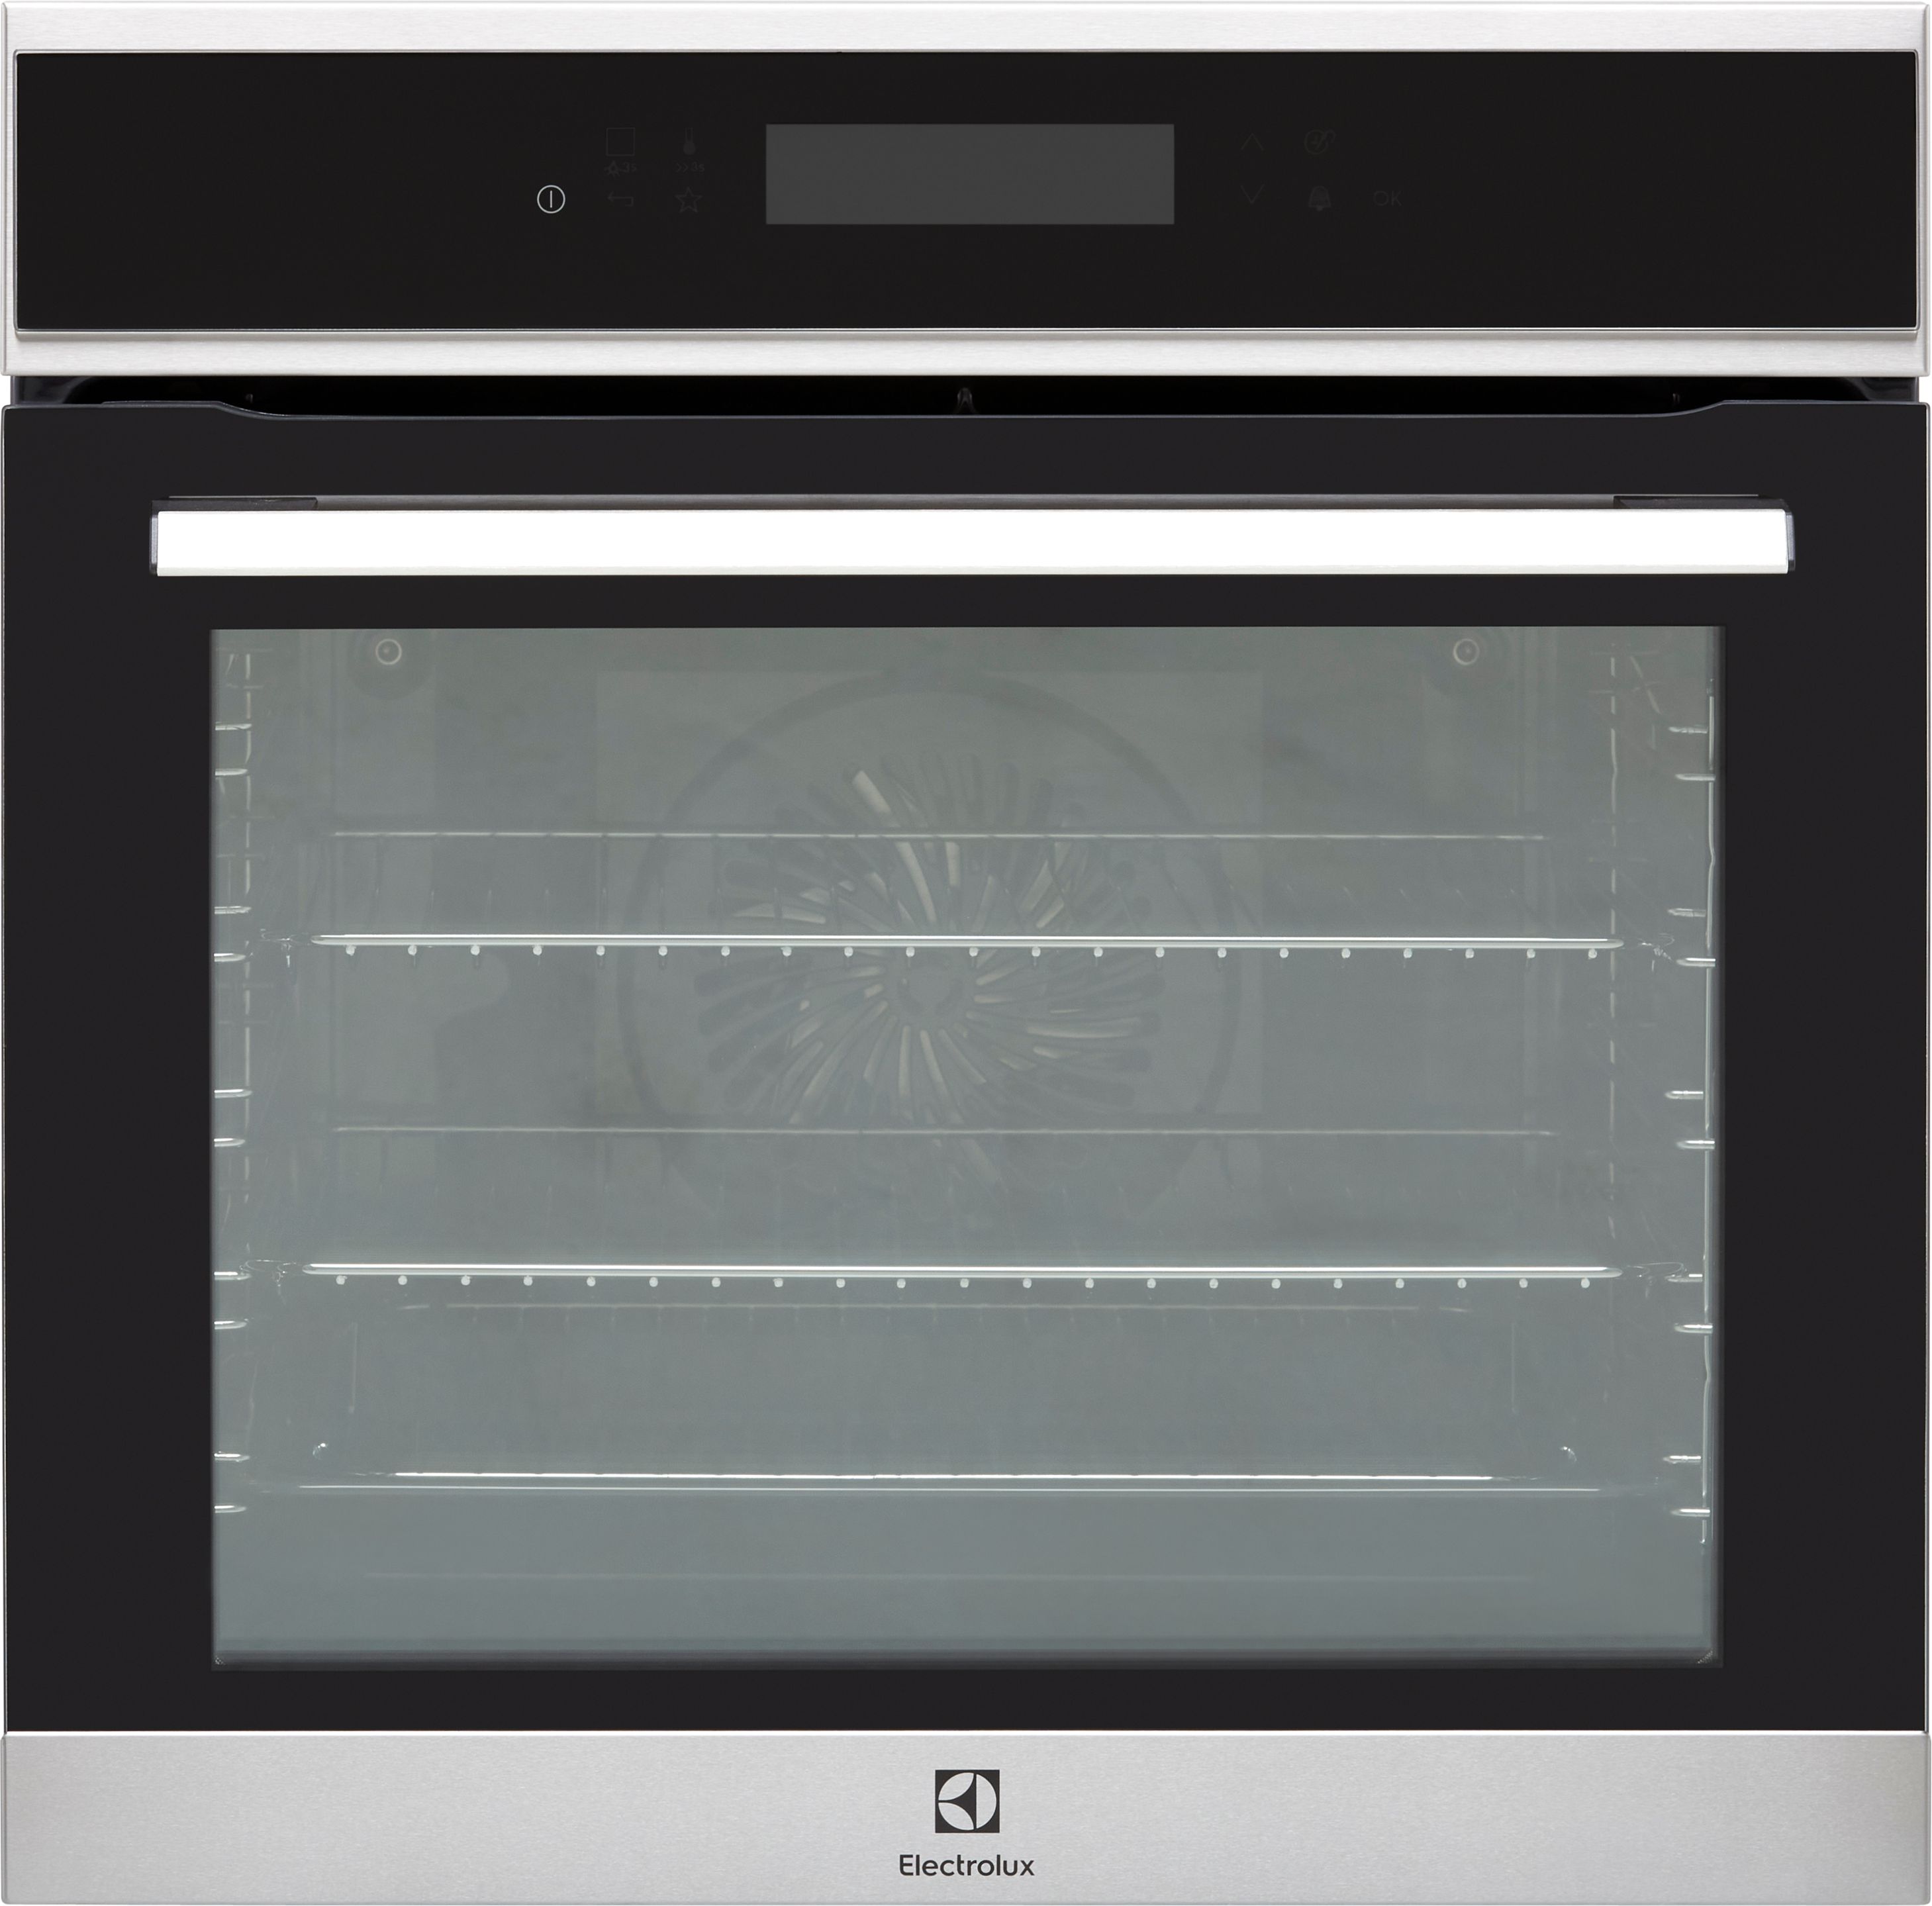 Electrolux KOEBP01X Built In Electric Single Oven with Pyrolytic Cleaning - Stainless Steel - A+ Rated, Stainless Steel